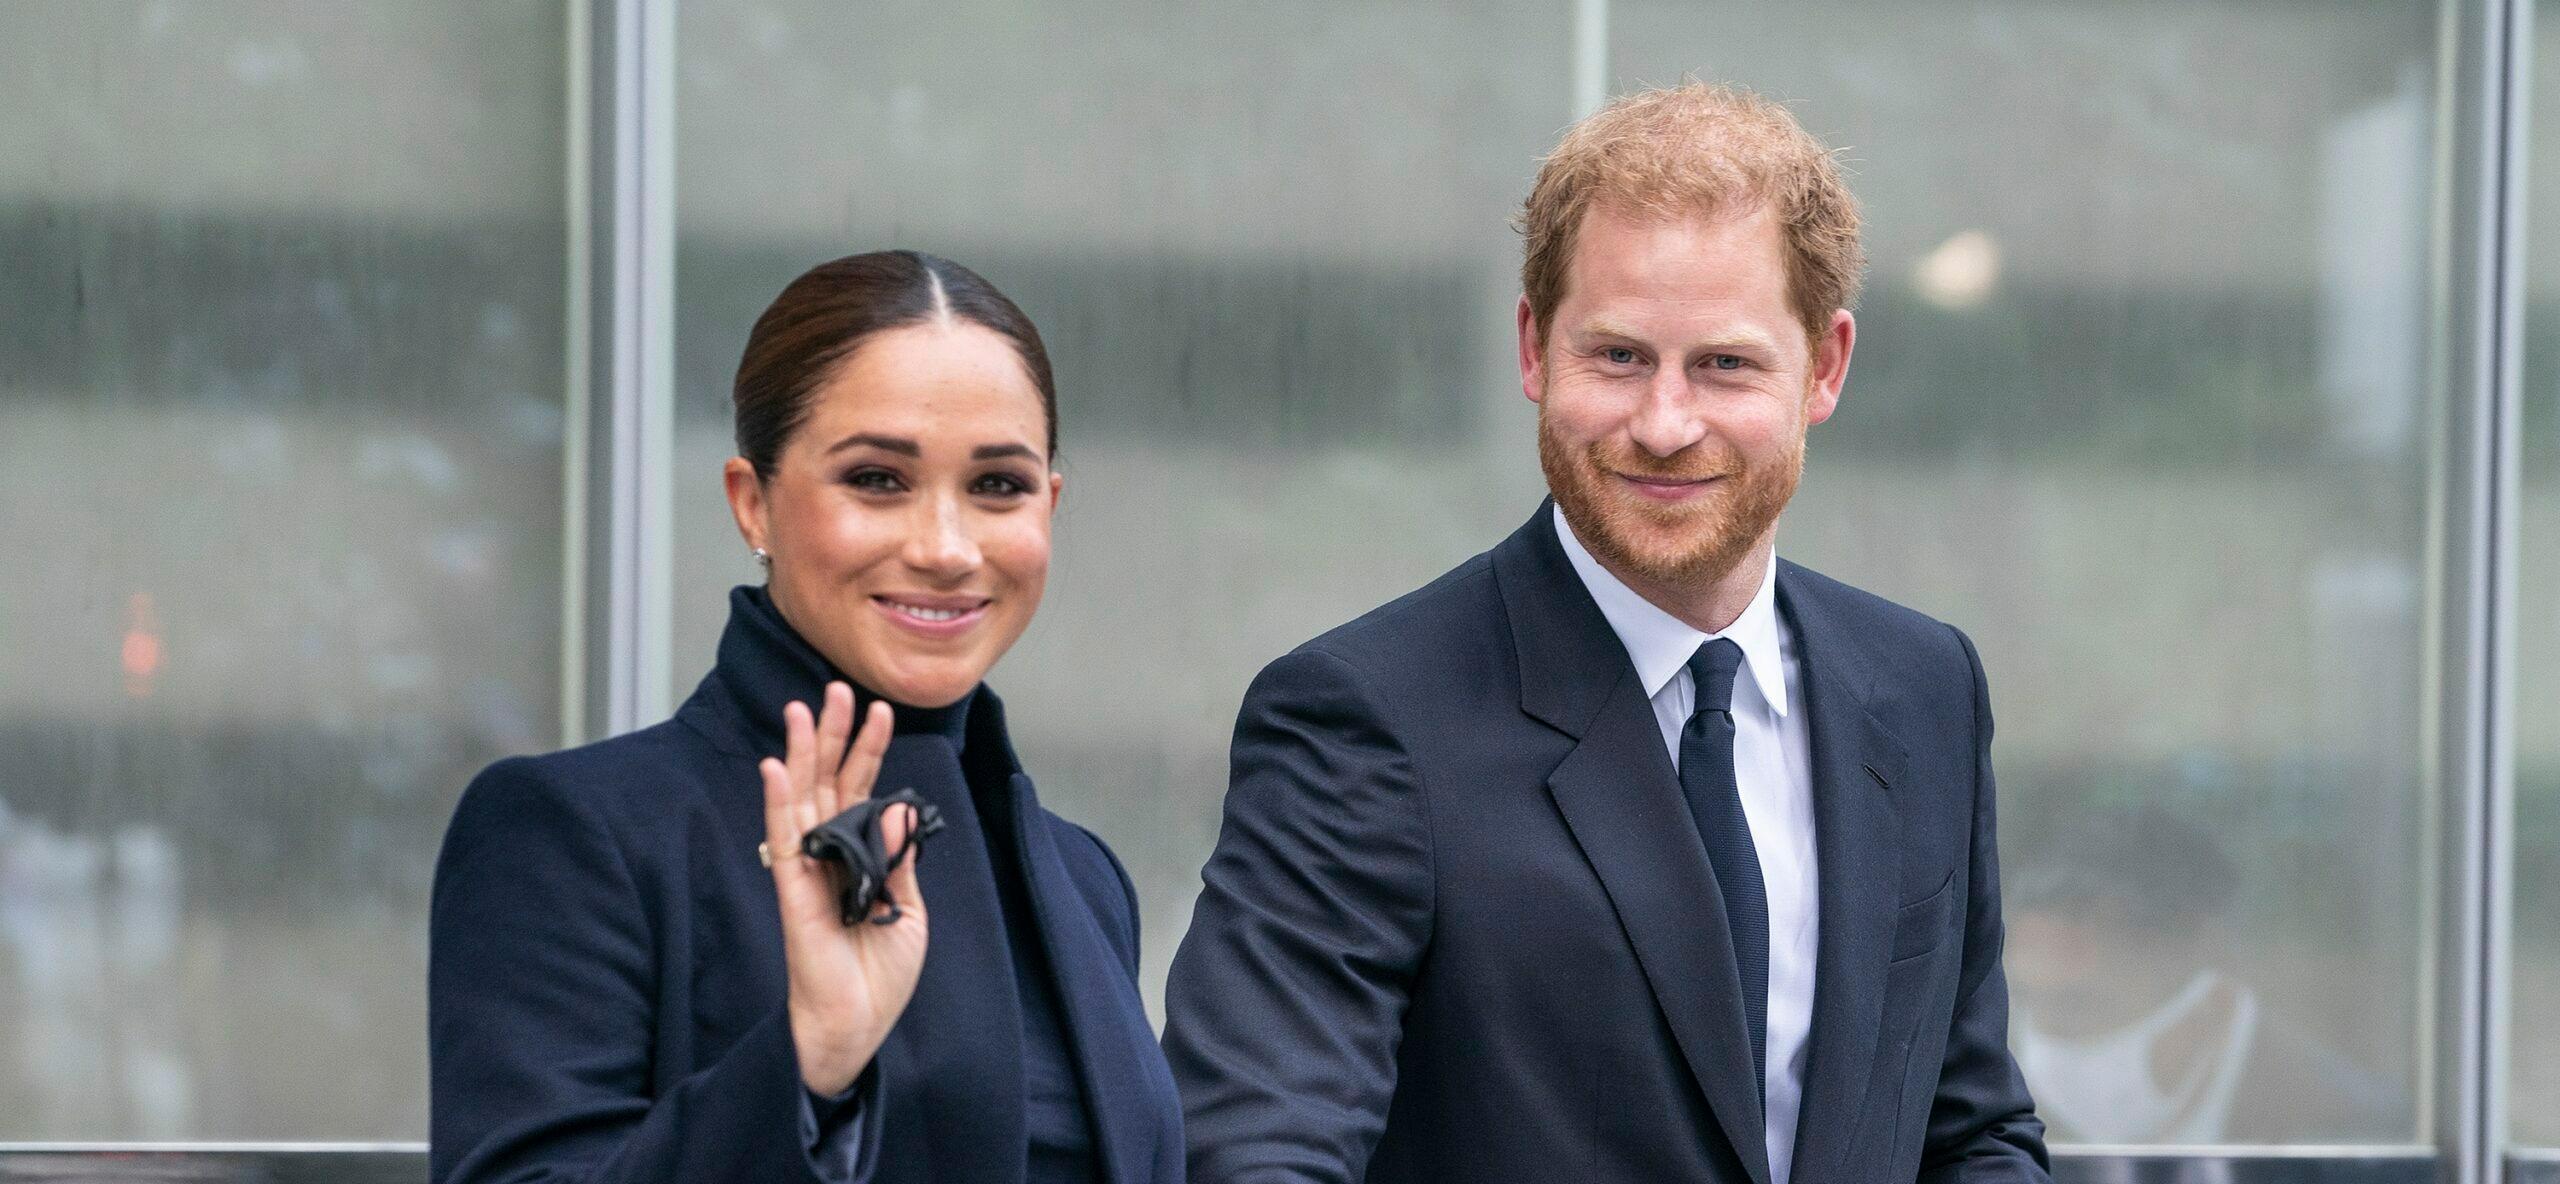 Booked And Busy! Prince Harry And Meghan Markle Move On To New Netflix Docuseries